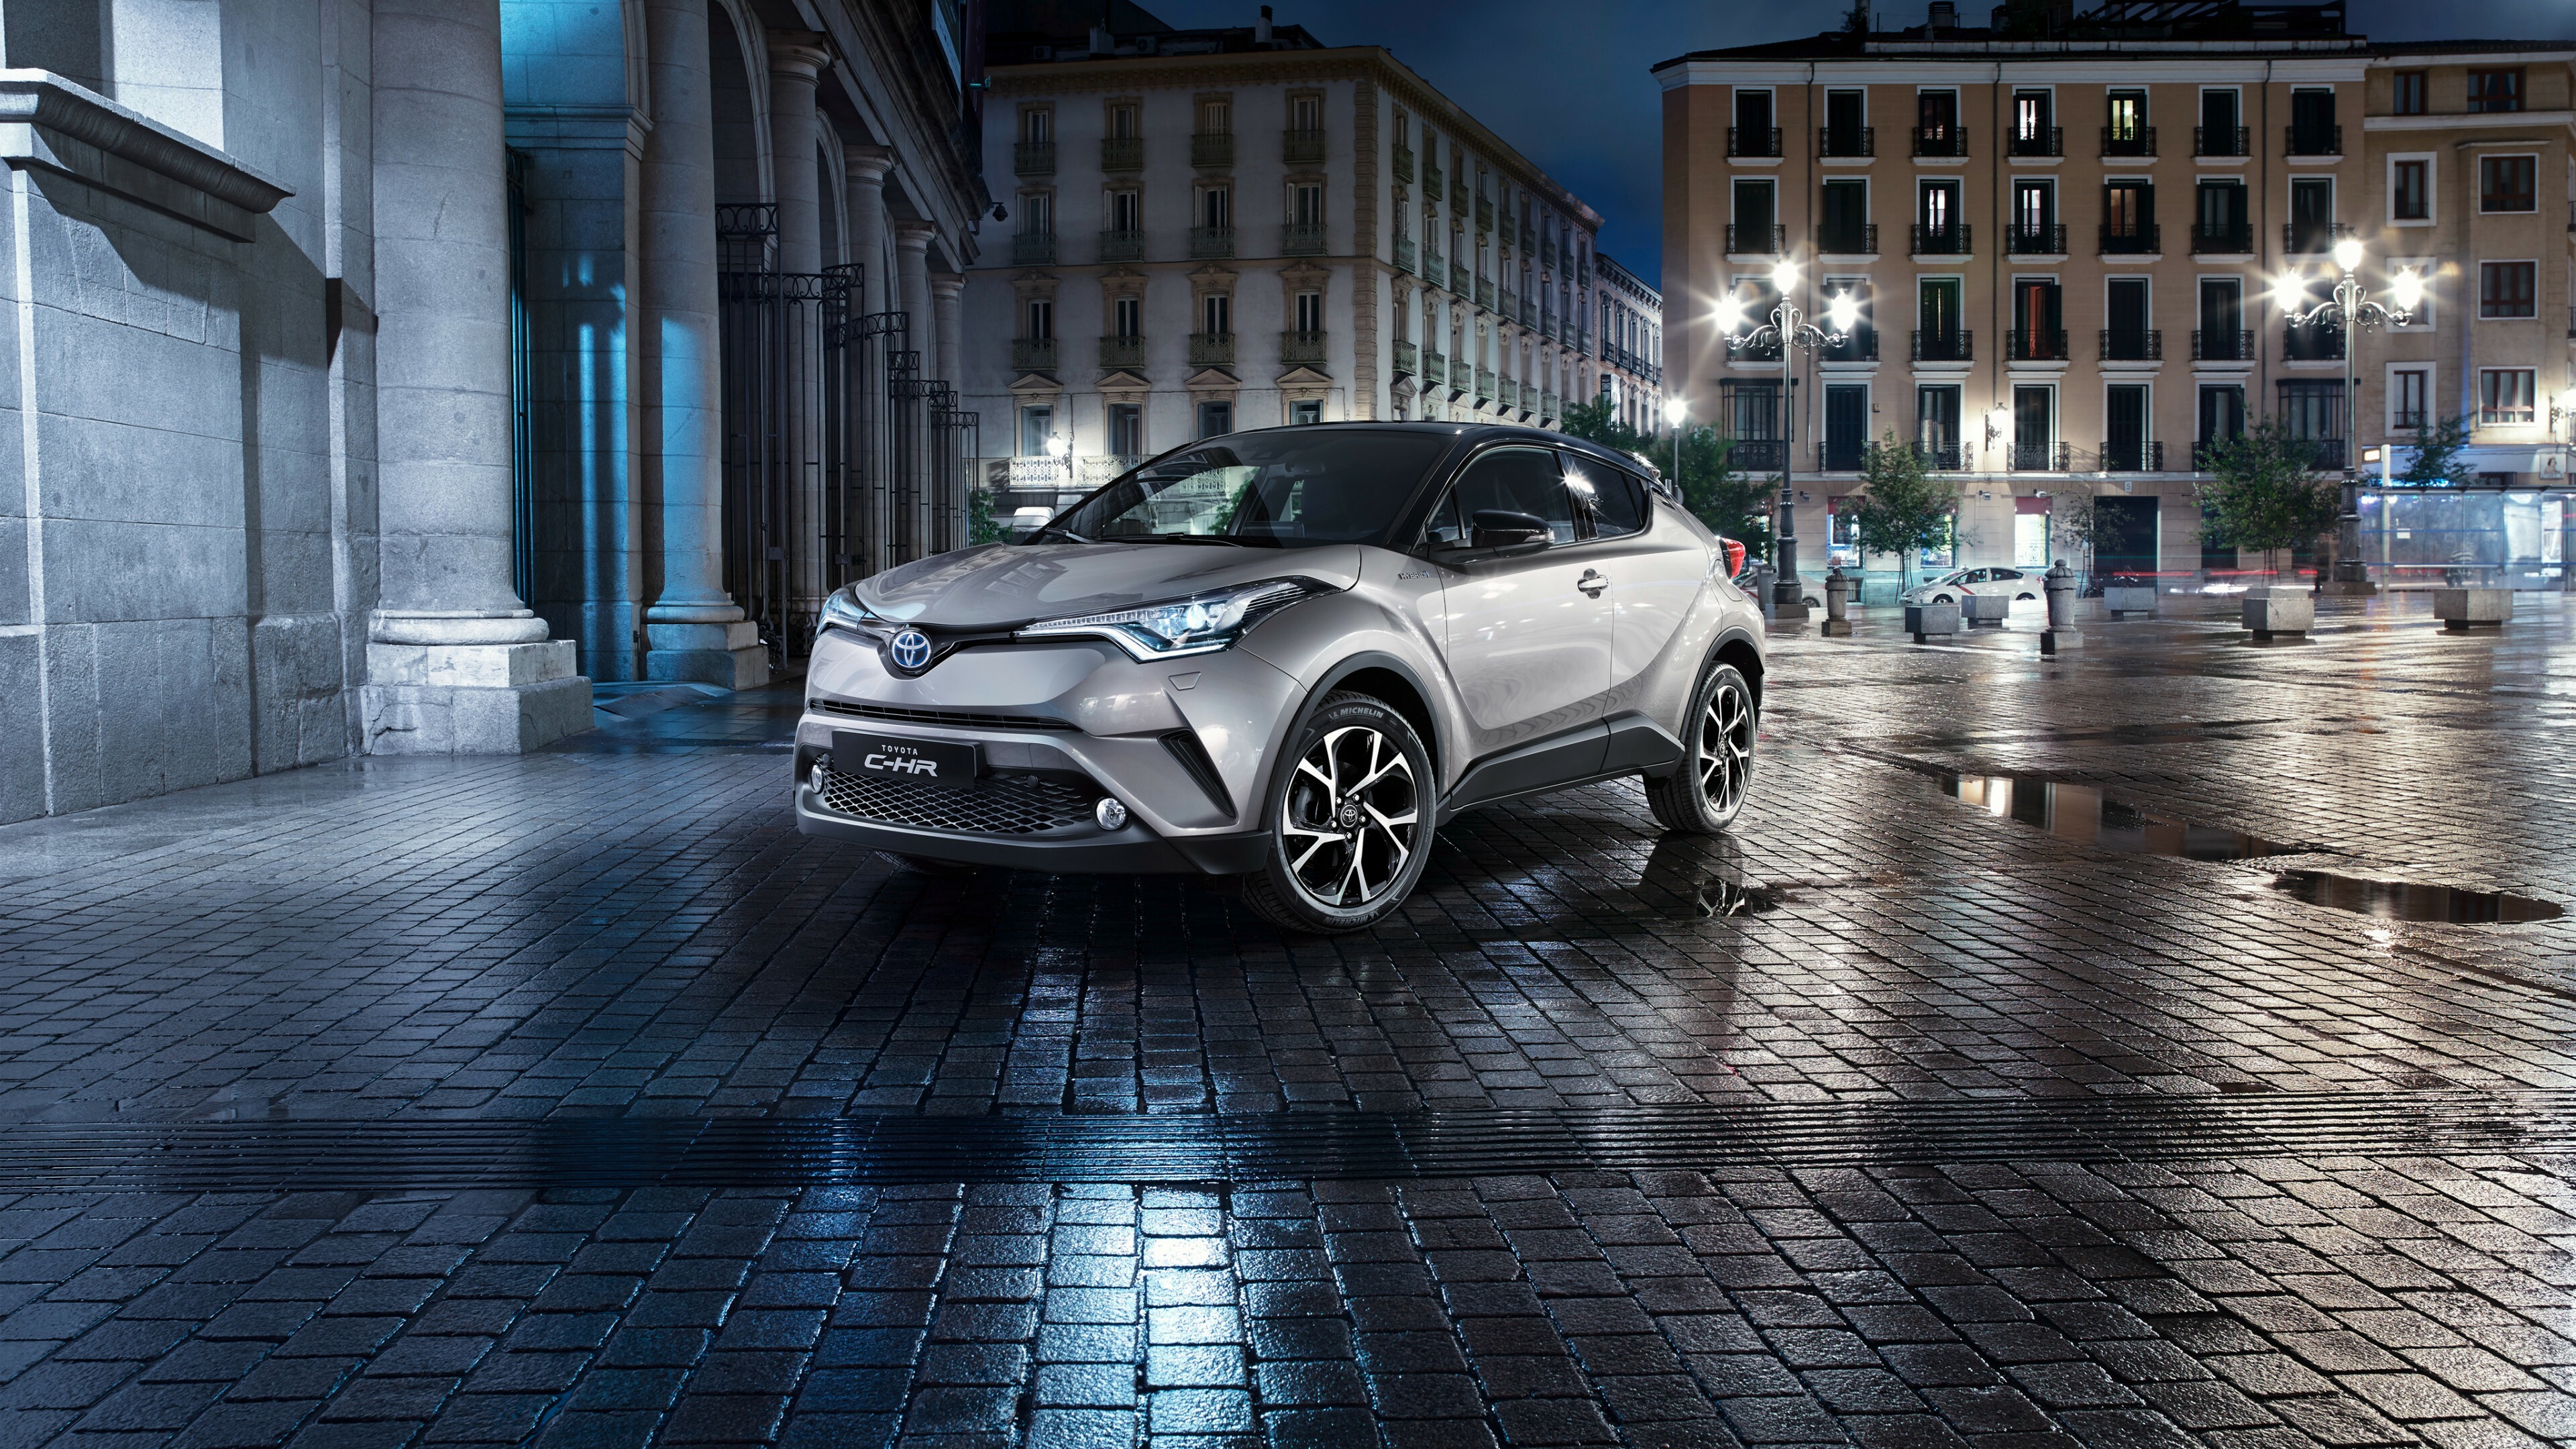 Toyota: C-HR, A subcompact crossover SUV manufactured by Japanese automaker Toyota since 2016. 3840x2160 4K Wallpaper.